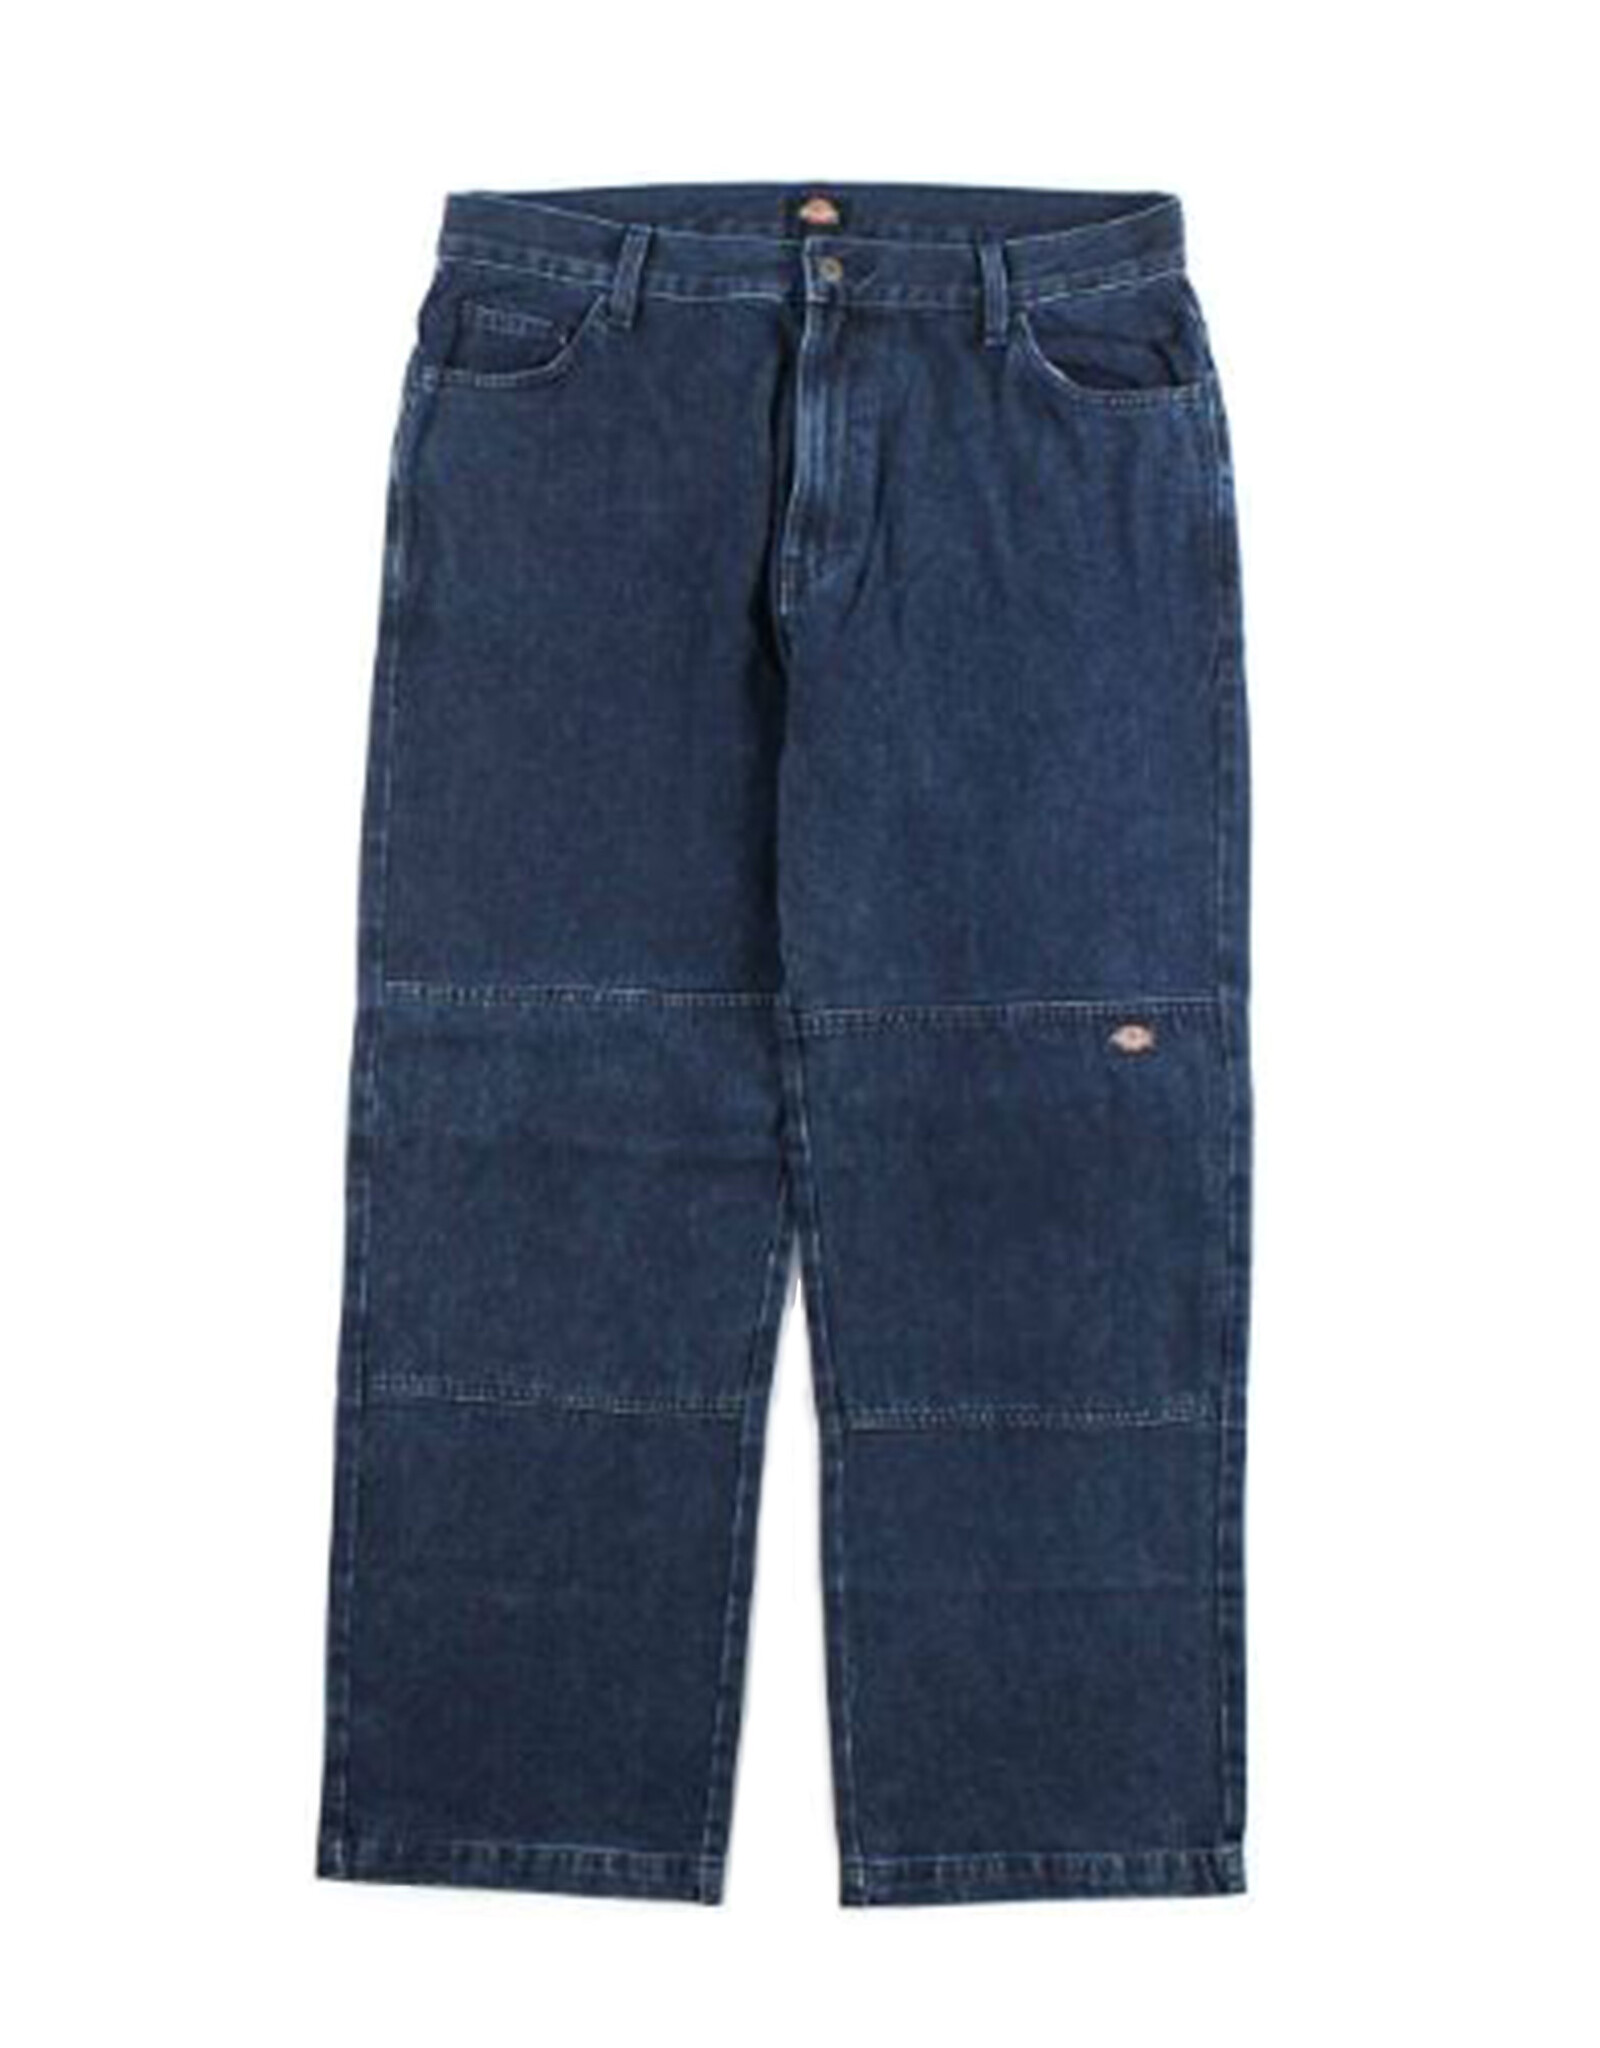 DICKIES Loose Fit Double Knee Jeans Stonewashed Indigo Blue - DUR05SNB